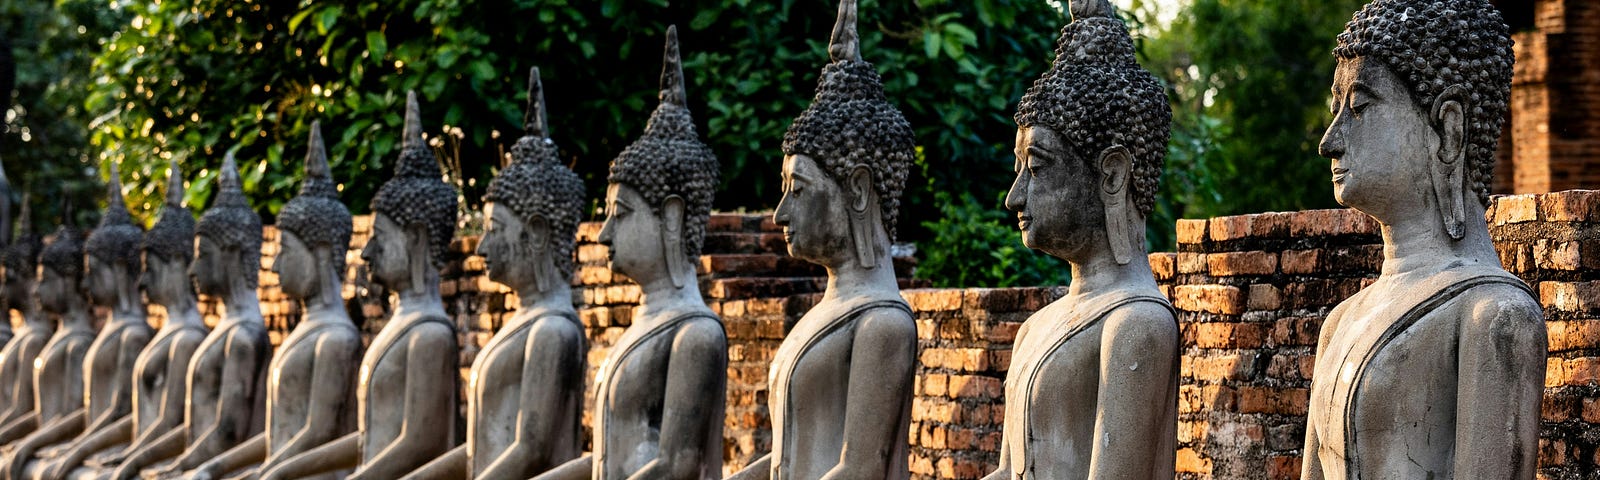 A row of Buddha statues in lotus posture exemplifying the endless approaches to the meditation practices.